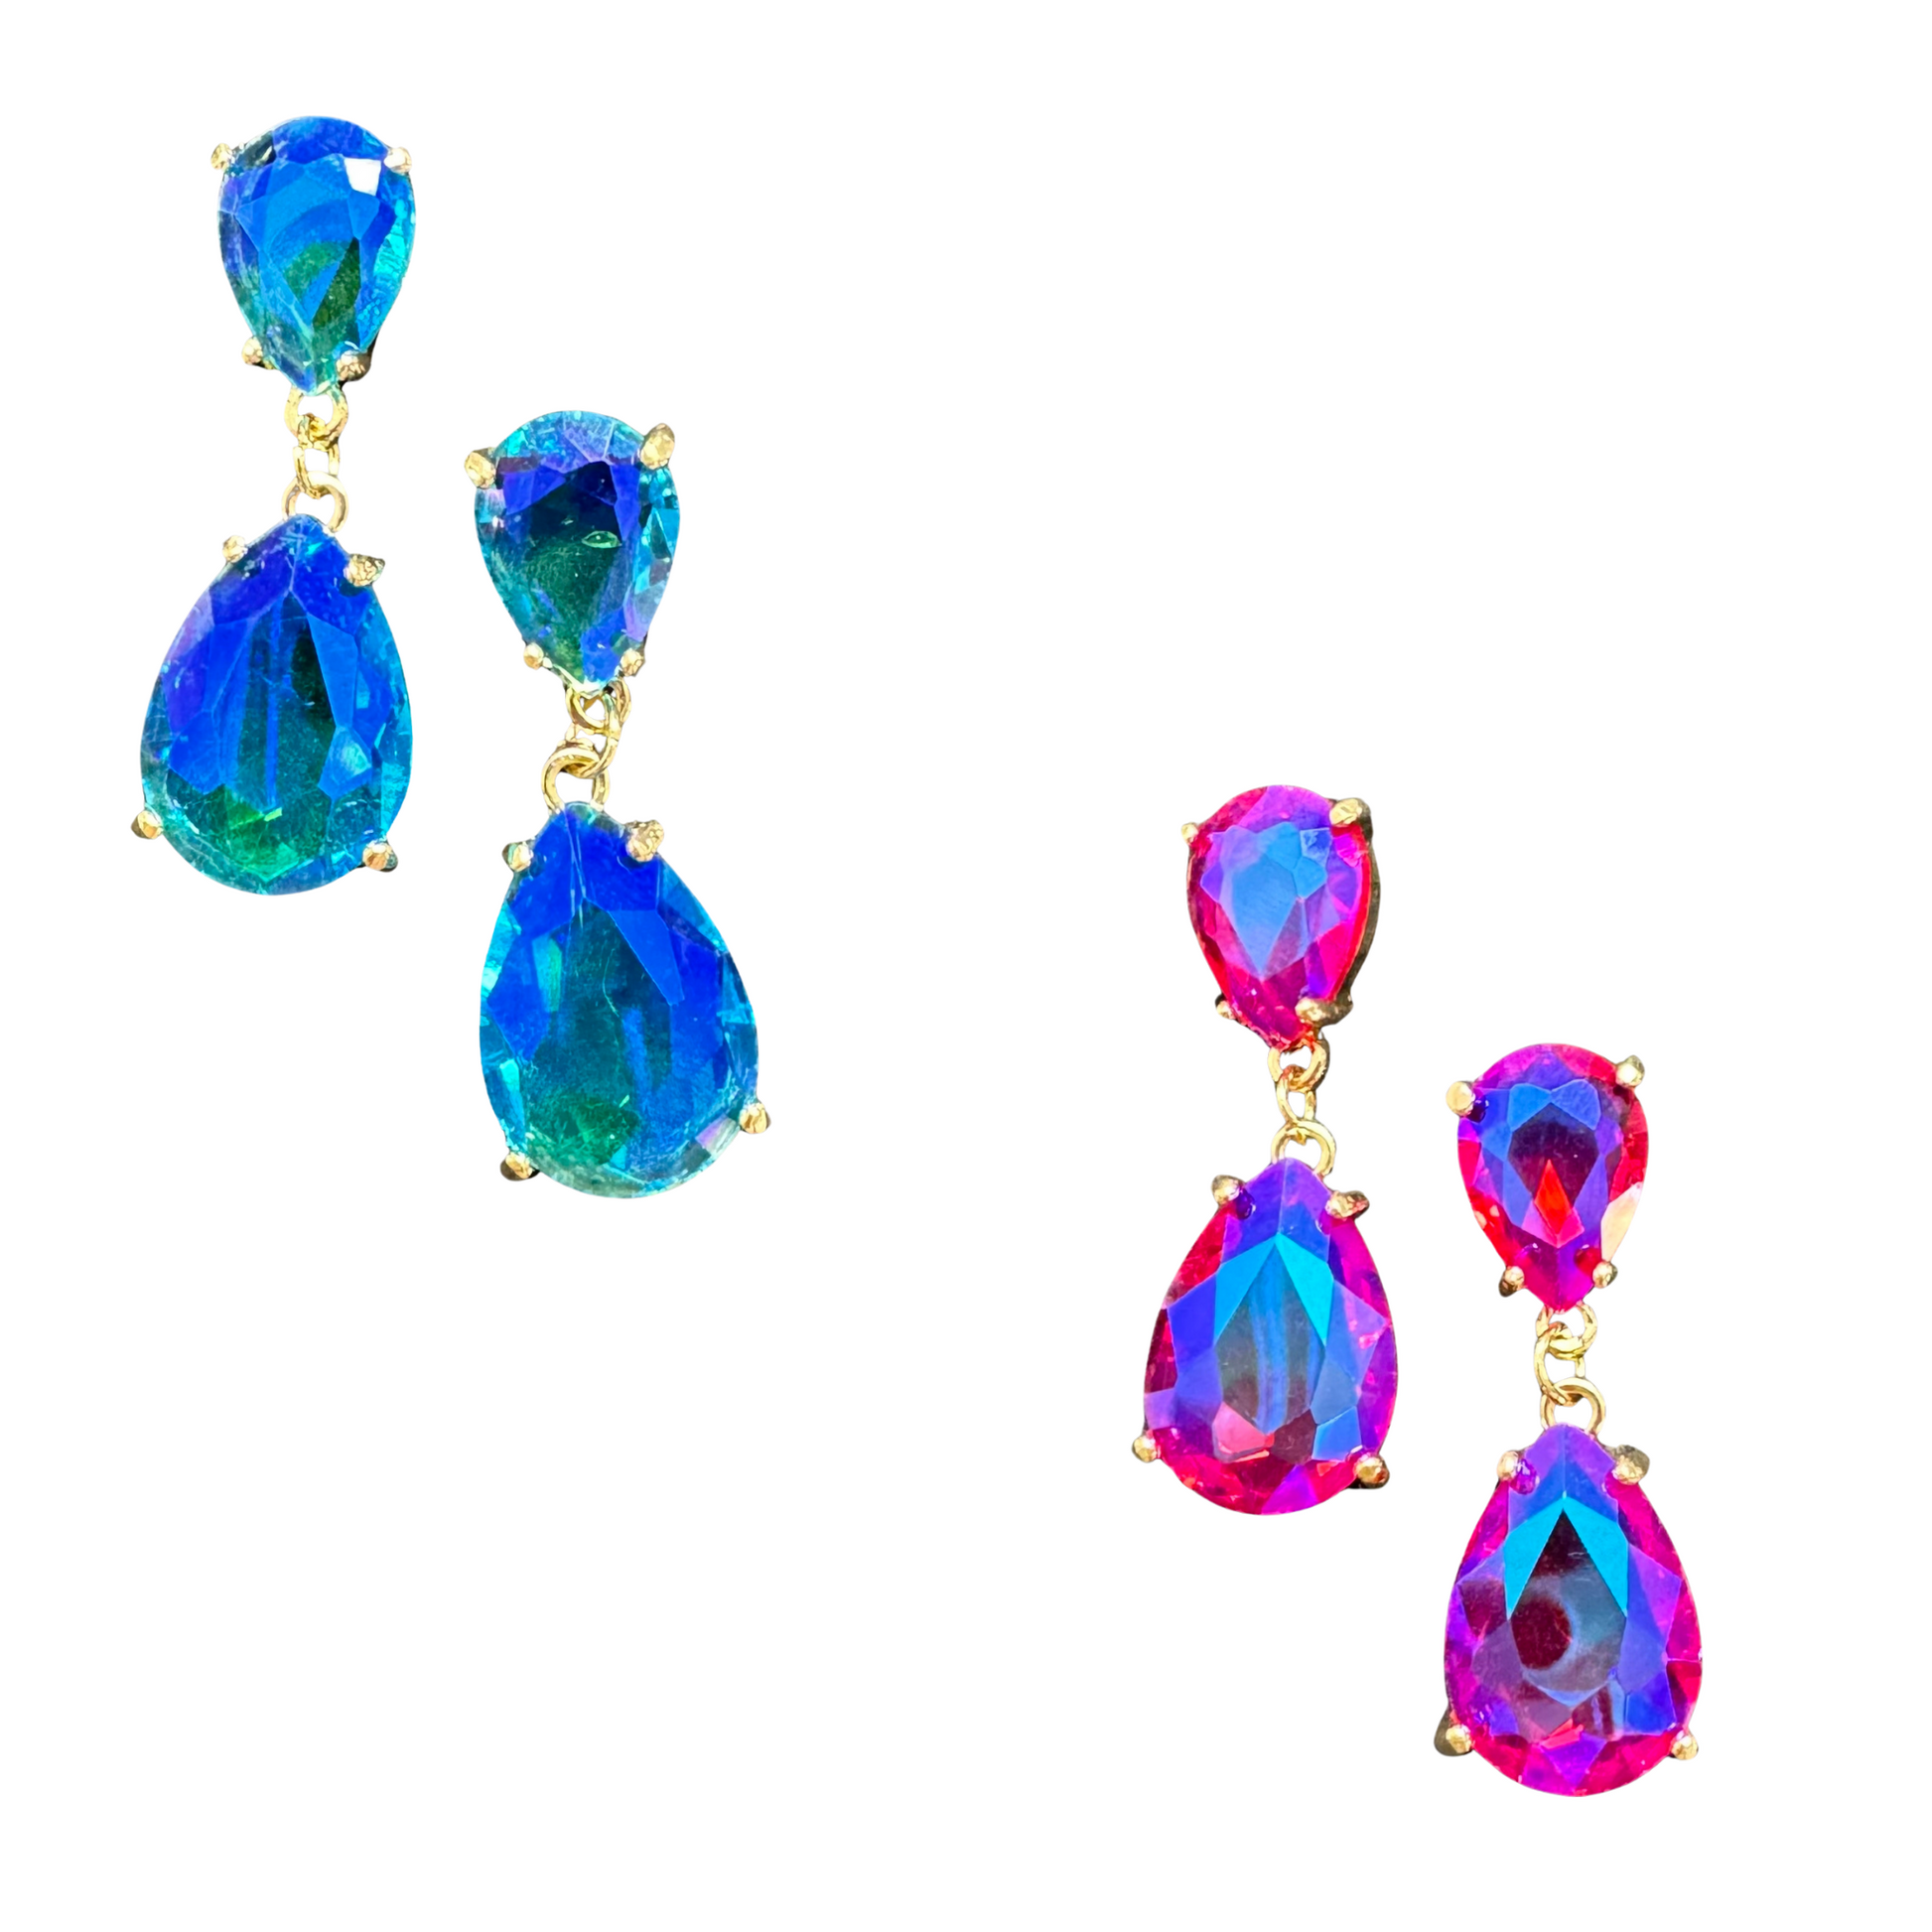 Experience a touch of iridescent beauty with our Colored Iridescent Earrings. With a stunning dangle design and a choice between fuchsia or turquoise, these earrings will add a pop of color to any outfit. Their iridescent finish adds a unique touch, making them the perfect accessory for any occasion.